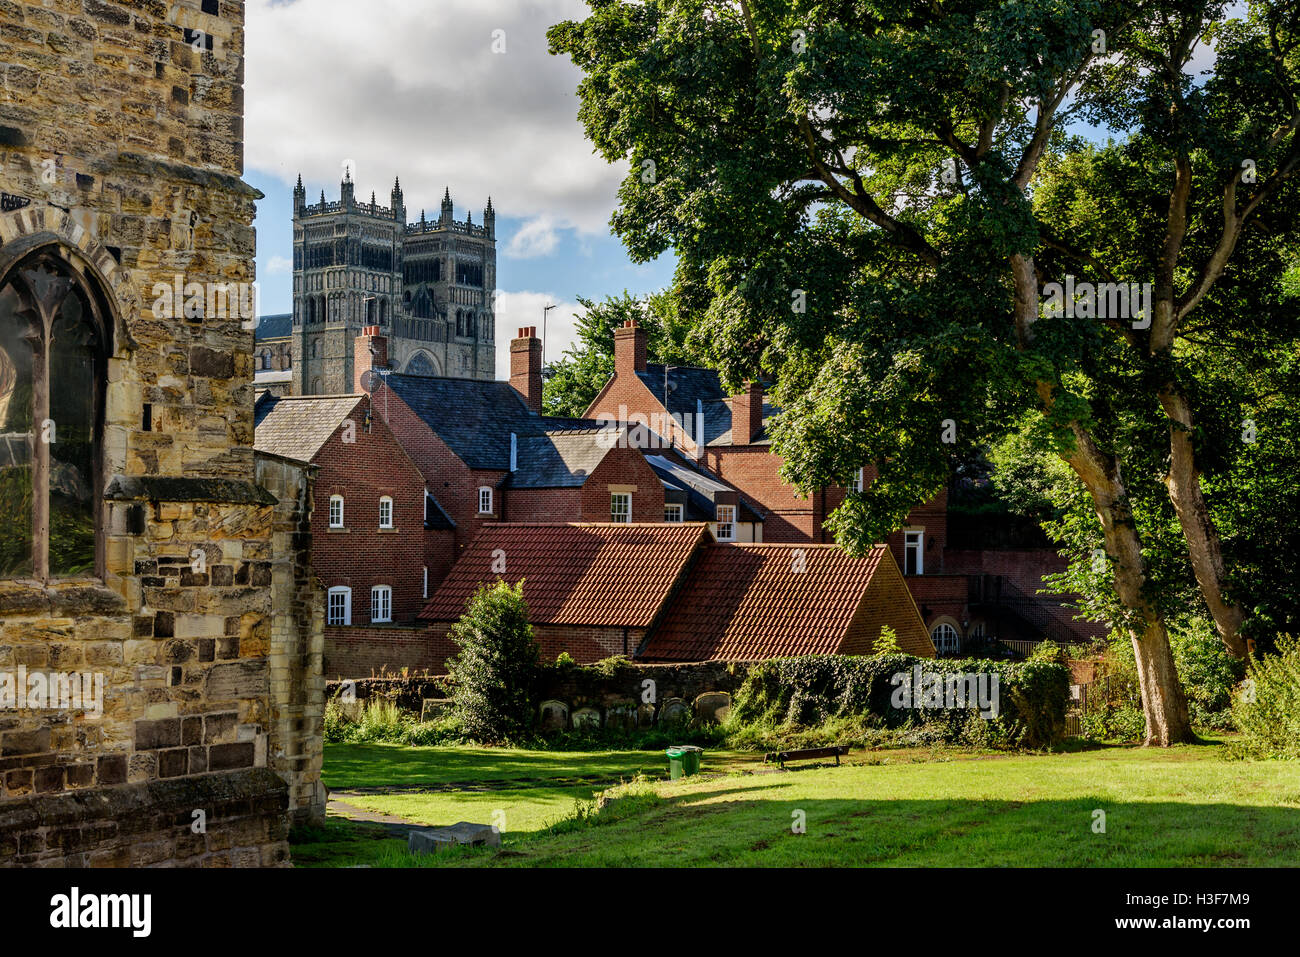 Durham is a historic city and the county town of County Durham in North East England. Stock Photo